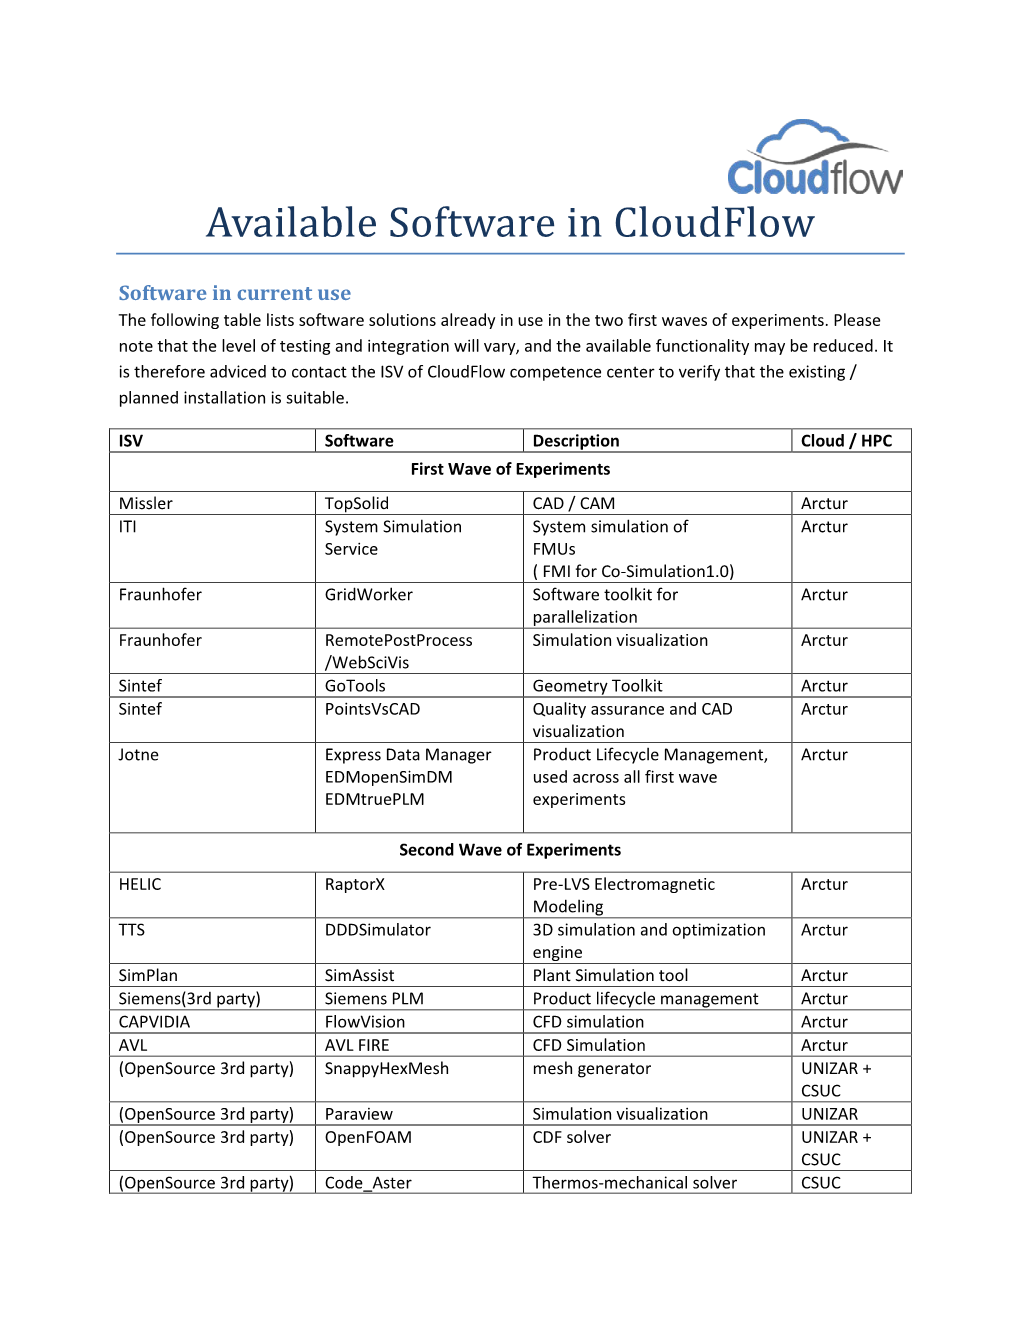 Available Software in Cloudflow